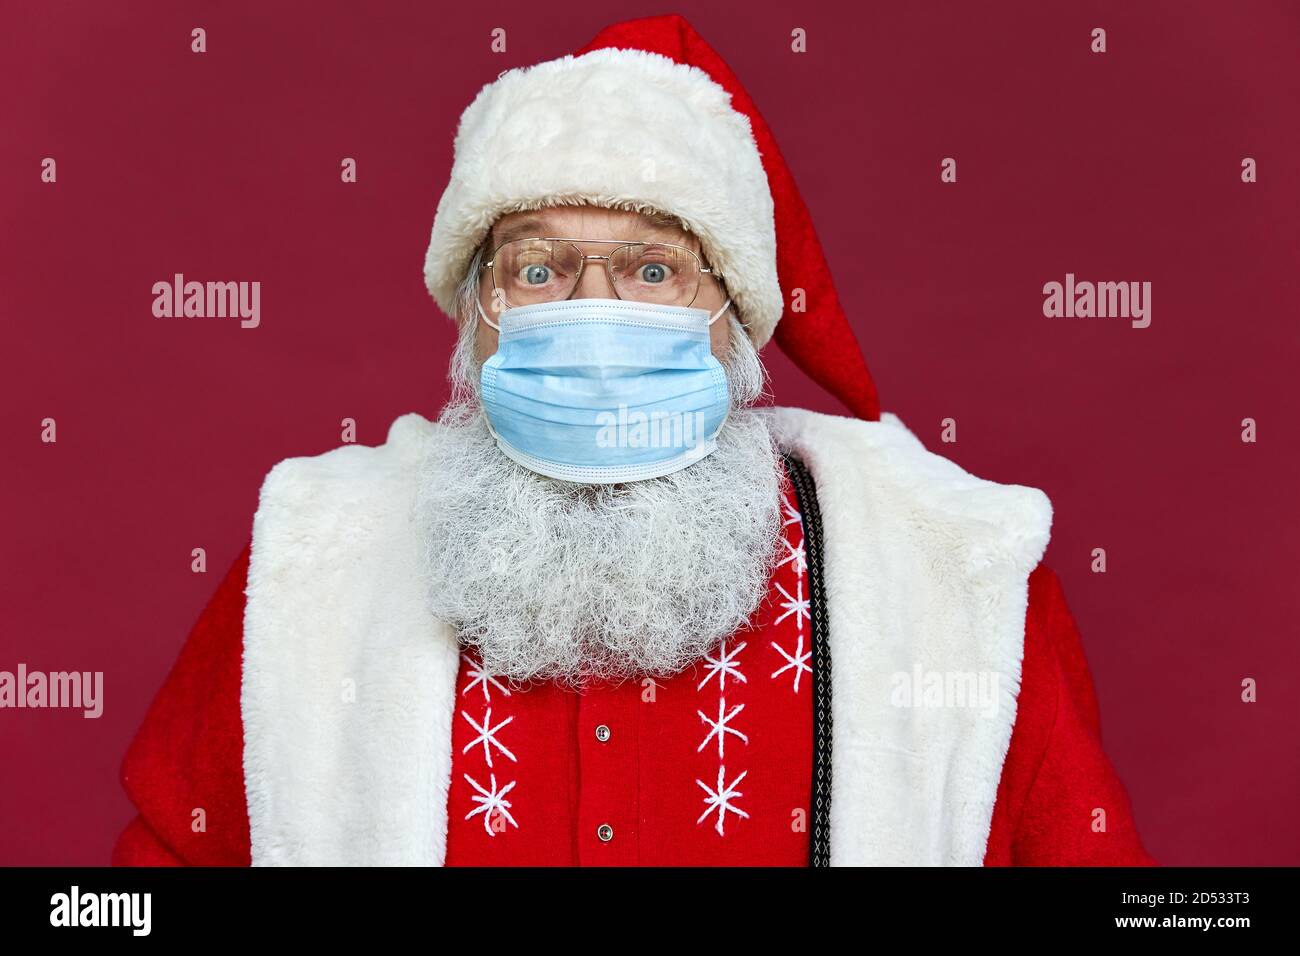 Funny bearded Santa Claus wearing face mask looking at camera on red background. Stock Photo